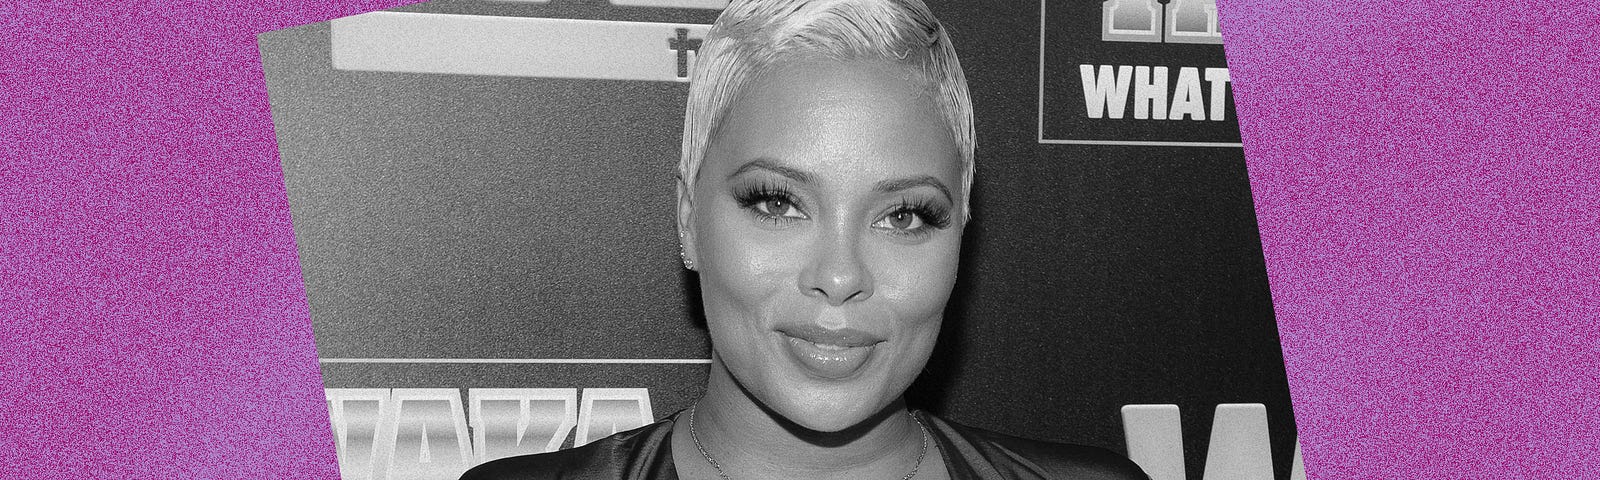 Black and white photo of Eva Marcille against a violet background.